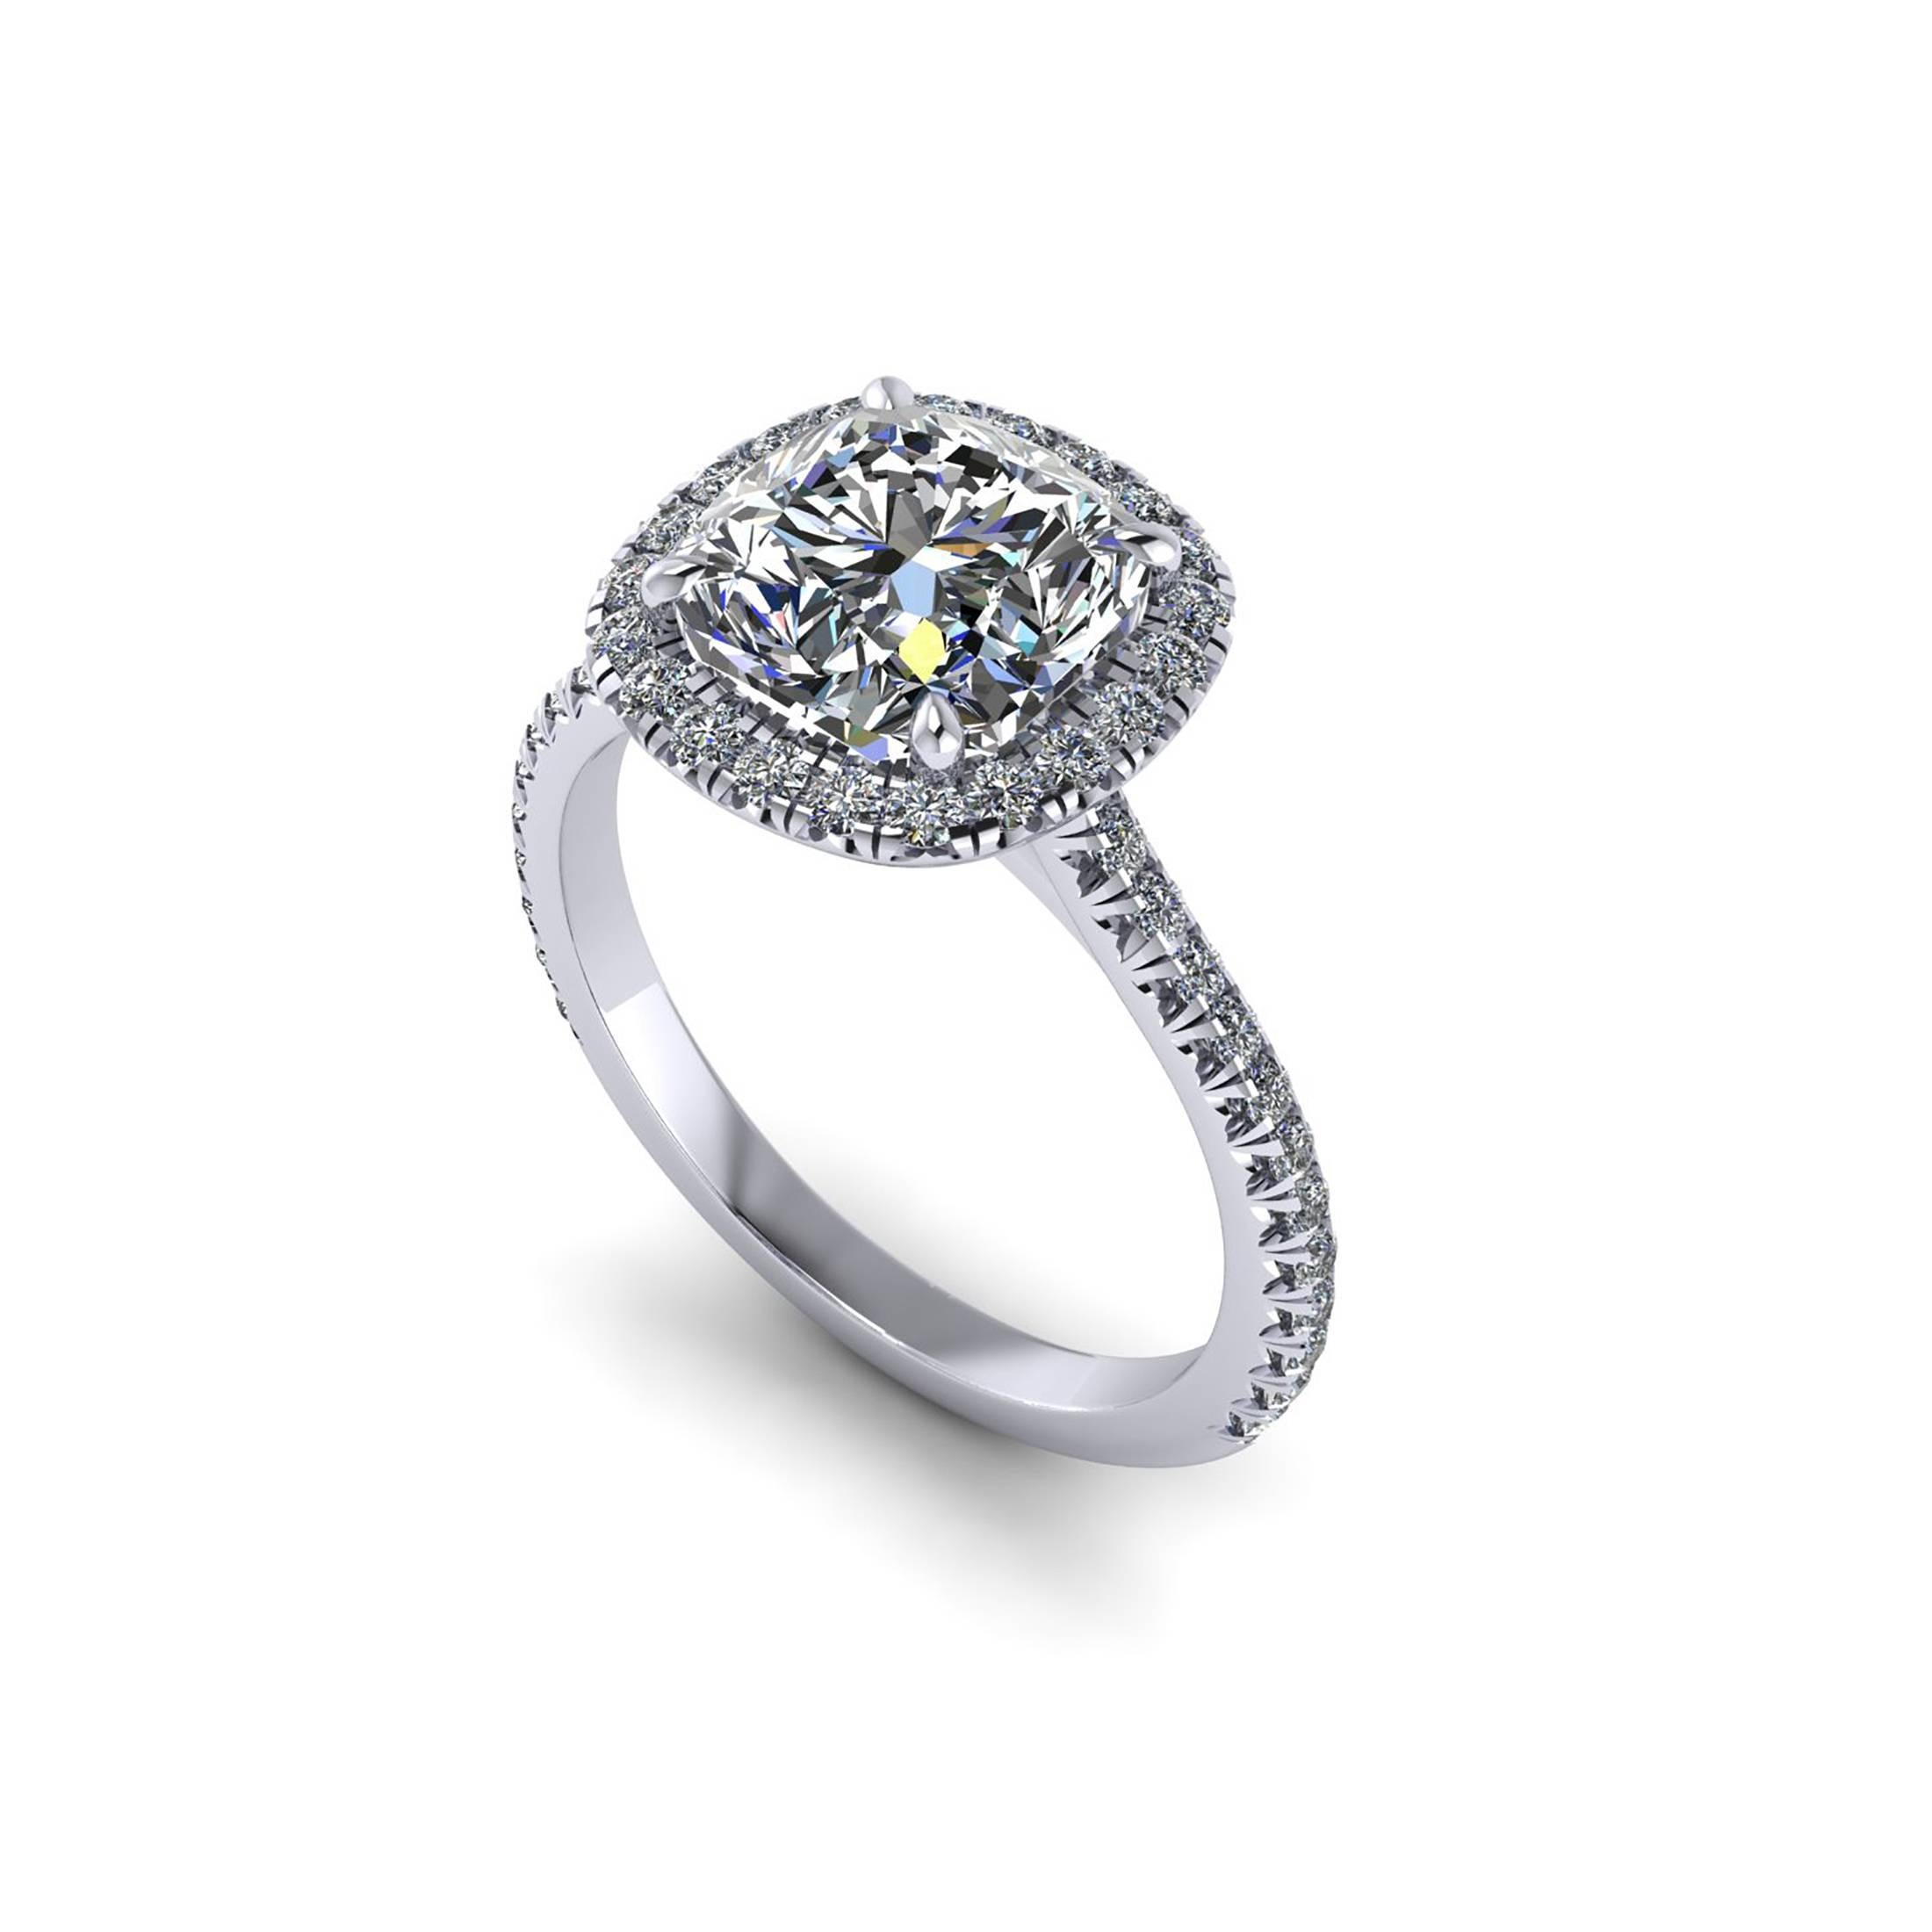 GIA Certified 2.01 carat cushion cut wonderful diamond, H color, SI2 clarity,  in a hand made Platinum ring, with a halo of white diamonds and diamond of the shank, hand set cut-down style for enhancing to the maximum the reflection of the diamonds